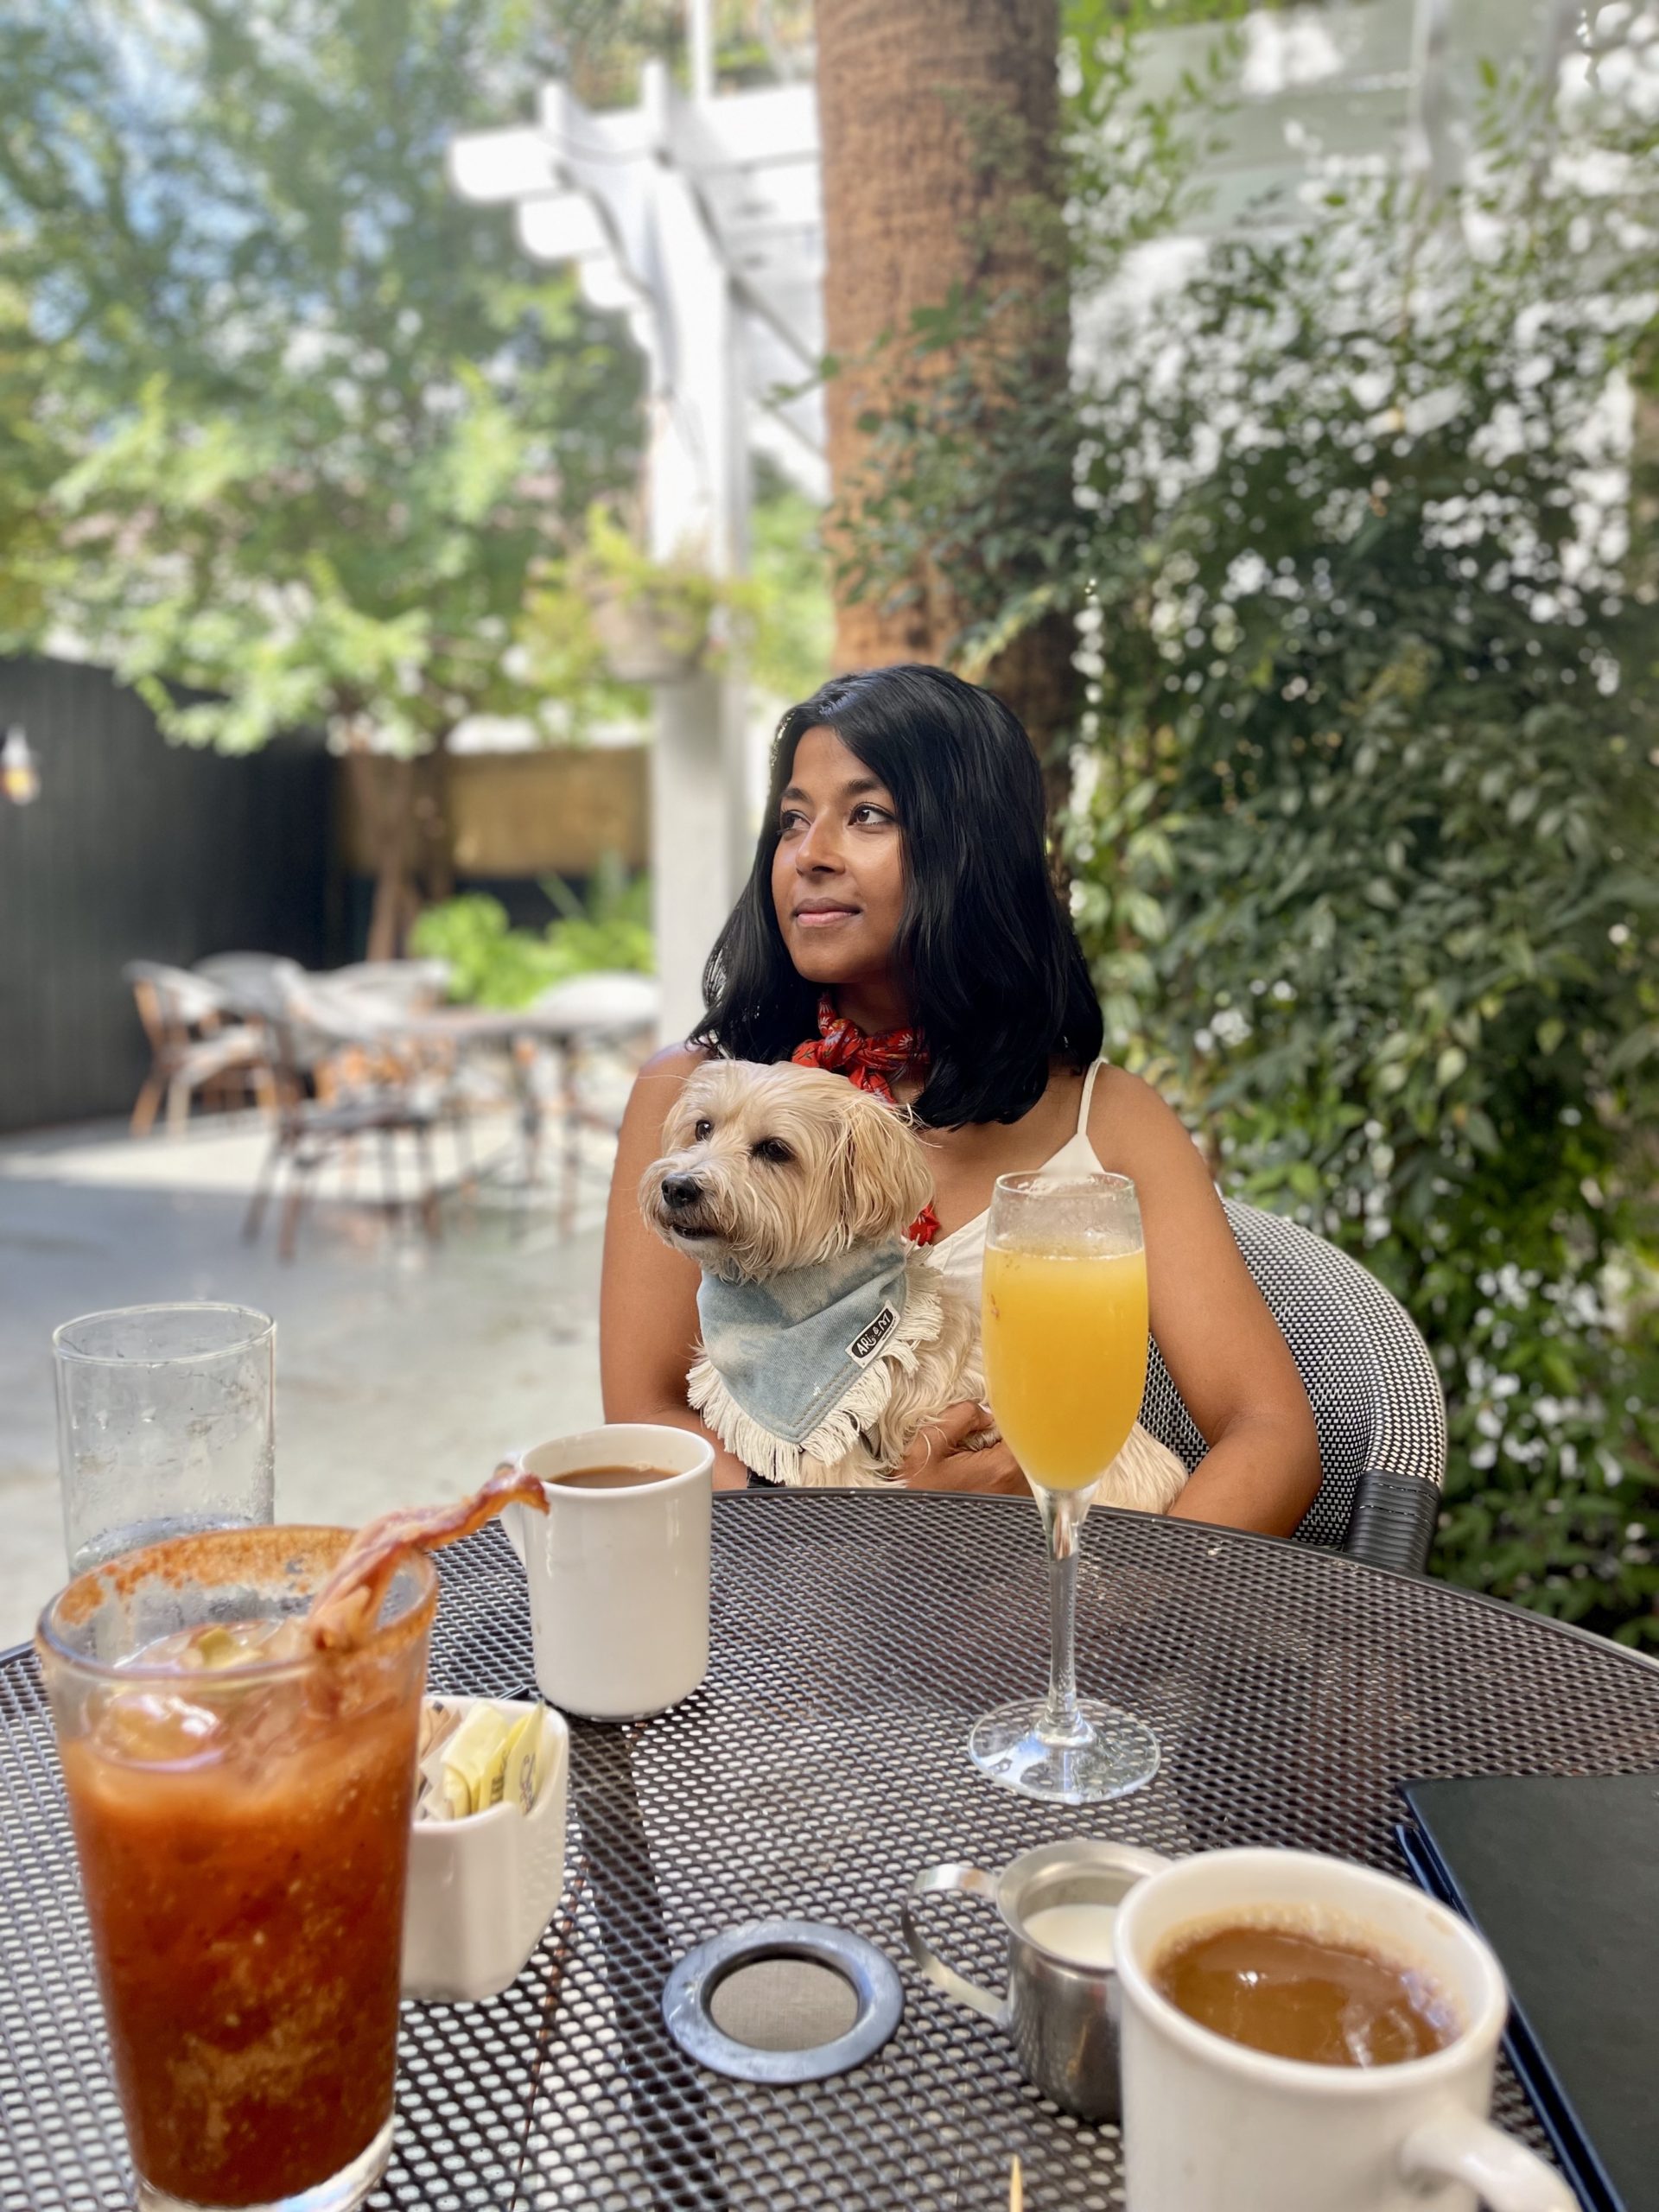 Sharon, a women of Indian descent sits with her small tan dog, Teddy on her lap at Eli's Table